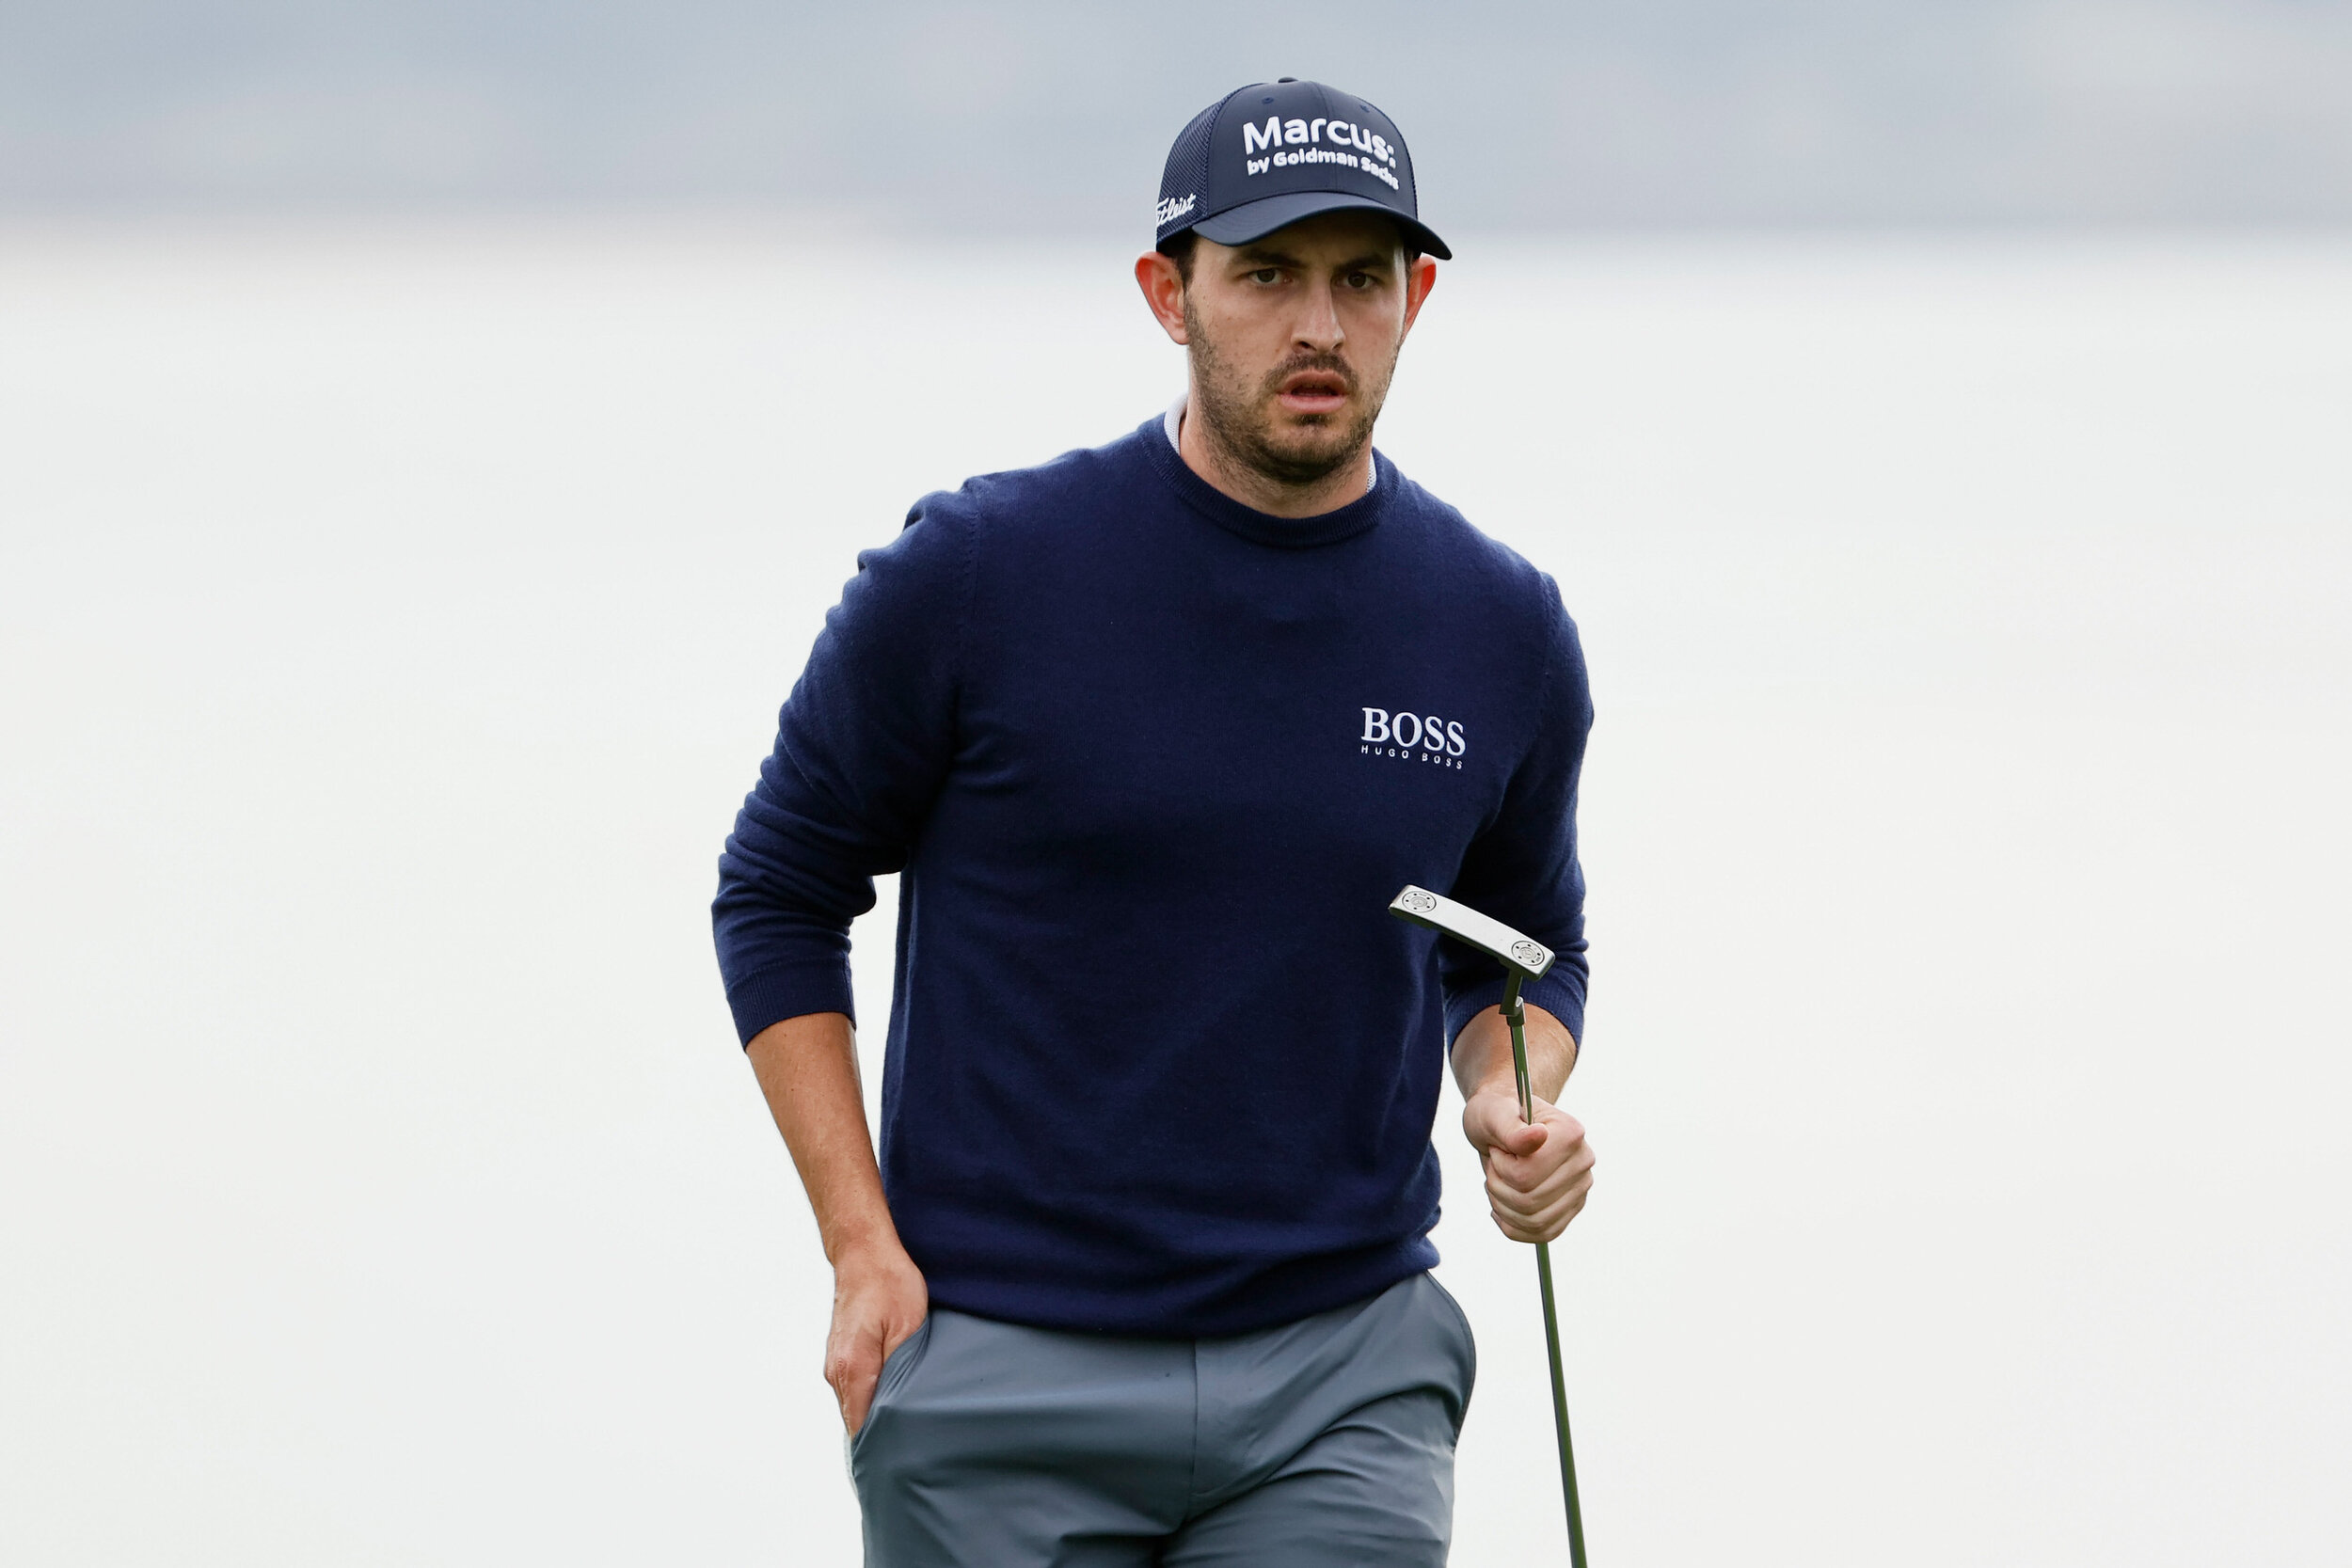  PEBBLE BEACH, CALIFORNIA - FEBRUARY 11: Patrick Cantlay of the United States reacts after finishing on the 18th green during the first round of the AT&T Pebble Beach Pro-Am at Pebble Beach Golf Links on February 11, 2021 in Pebble Beach, California.